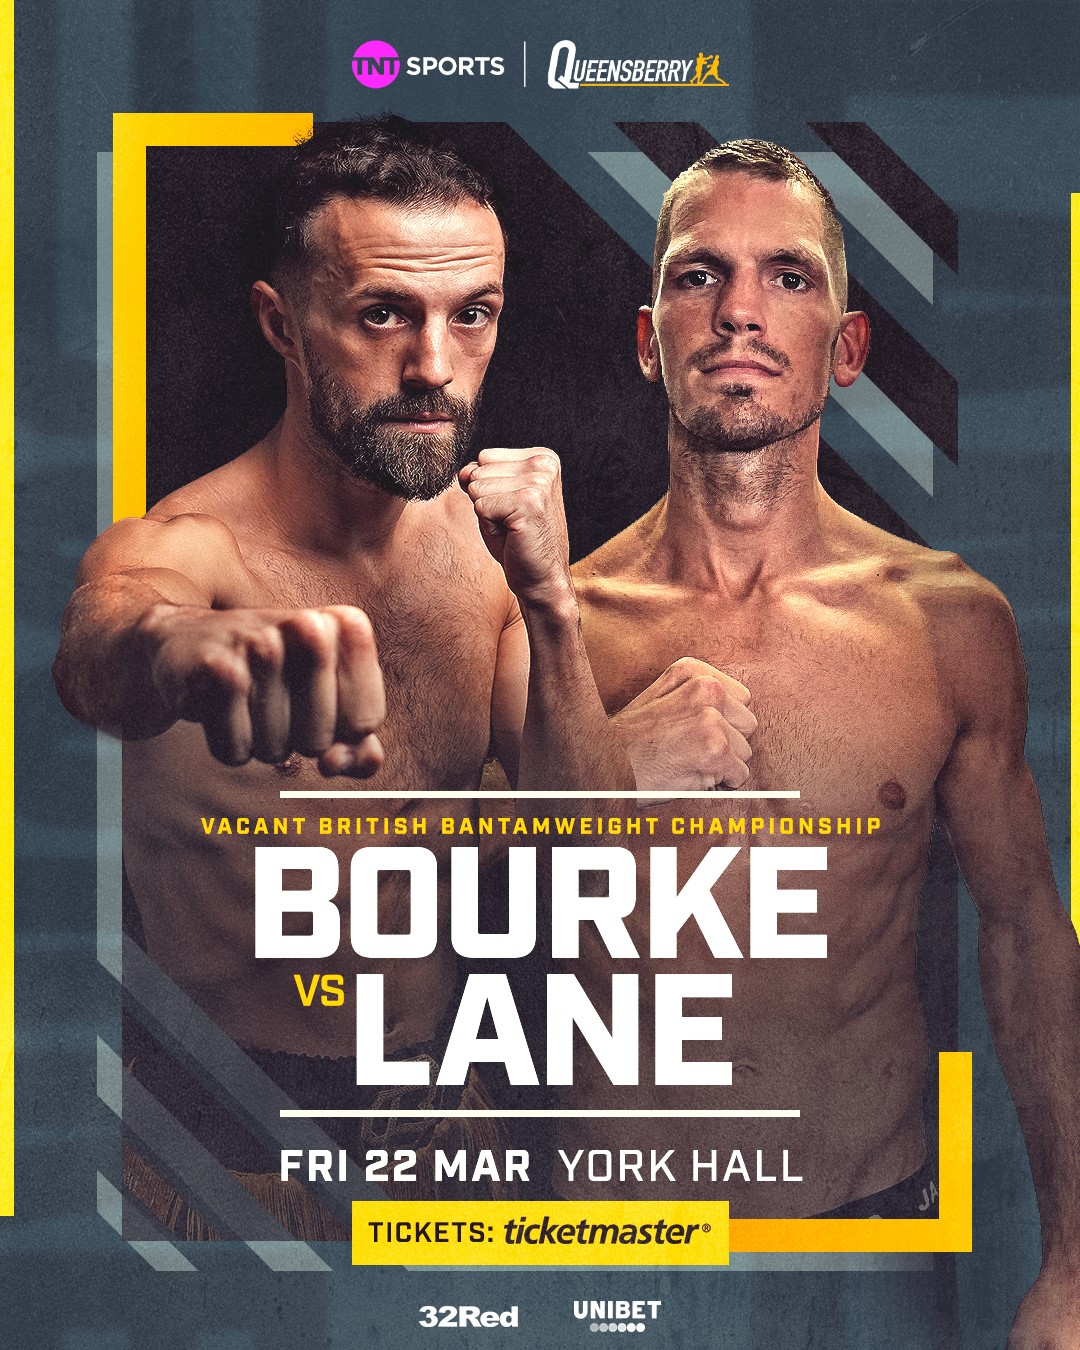 Chris Bourke will challenge for the British bantamweight title against Ashley Lane